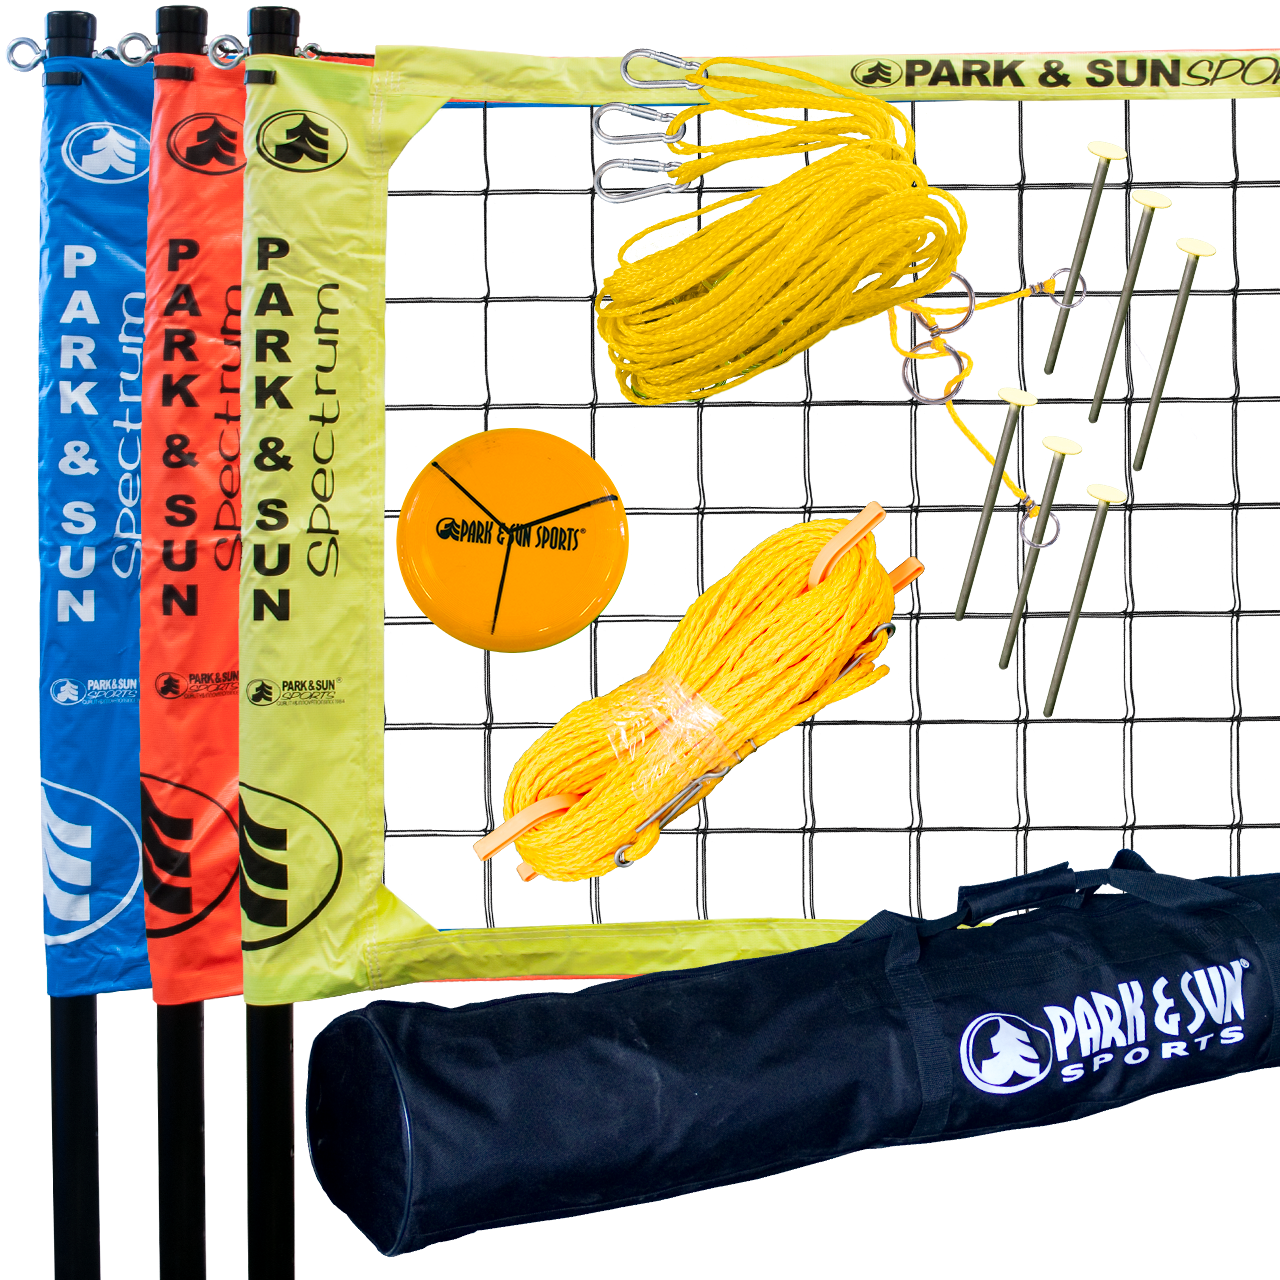 Park and Sports TRIBALL-PRO Product Layout